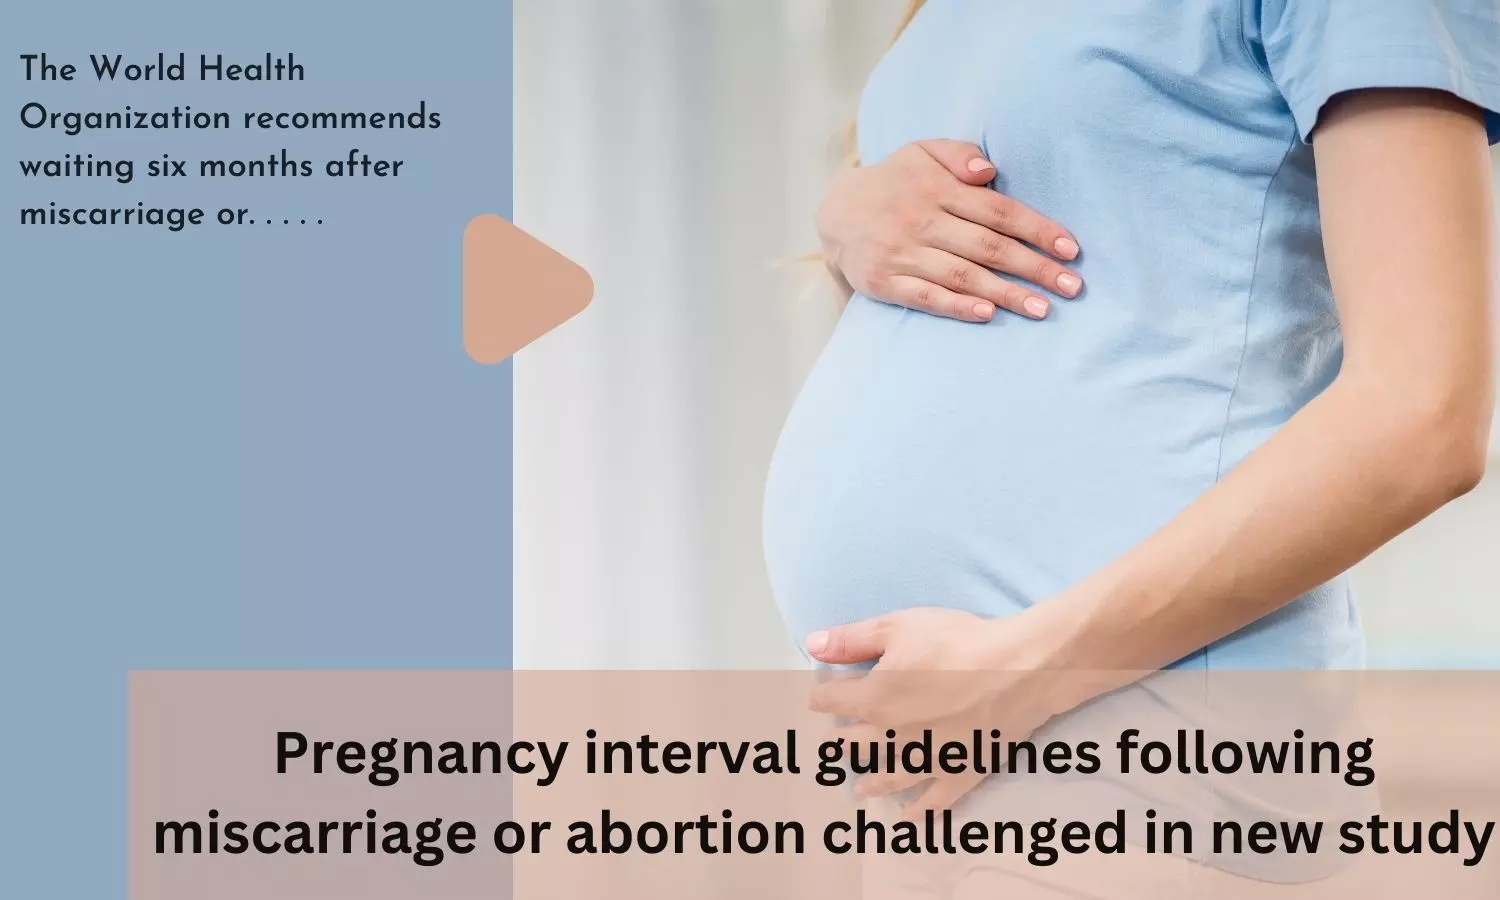 Pregnancy interval guidelines following miscarriage or abortion challenged in new study